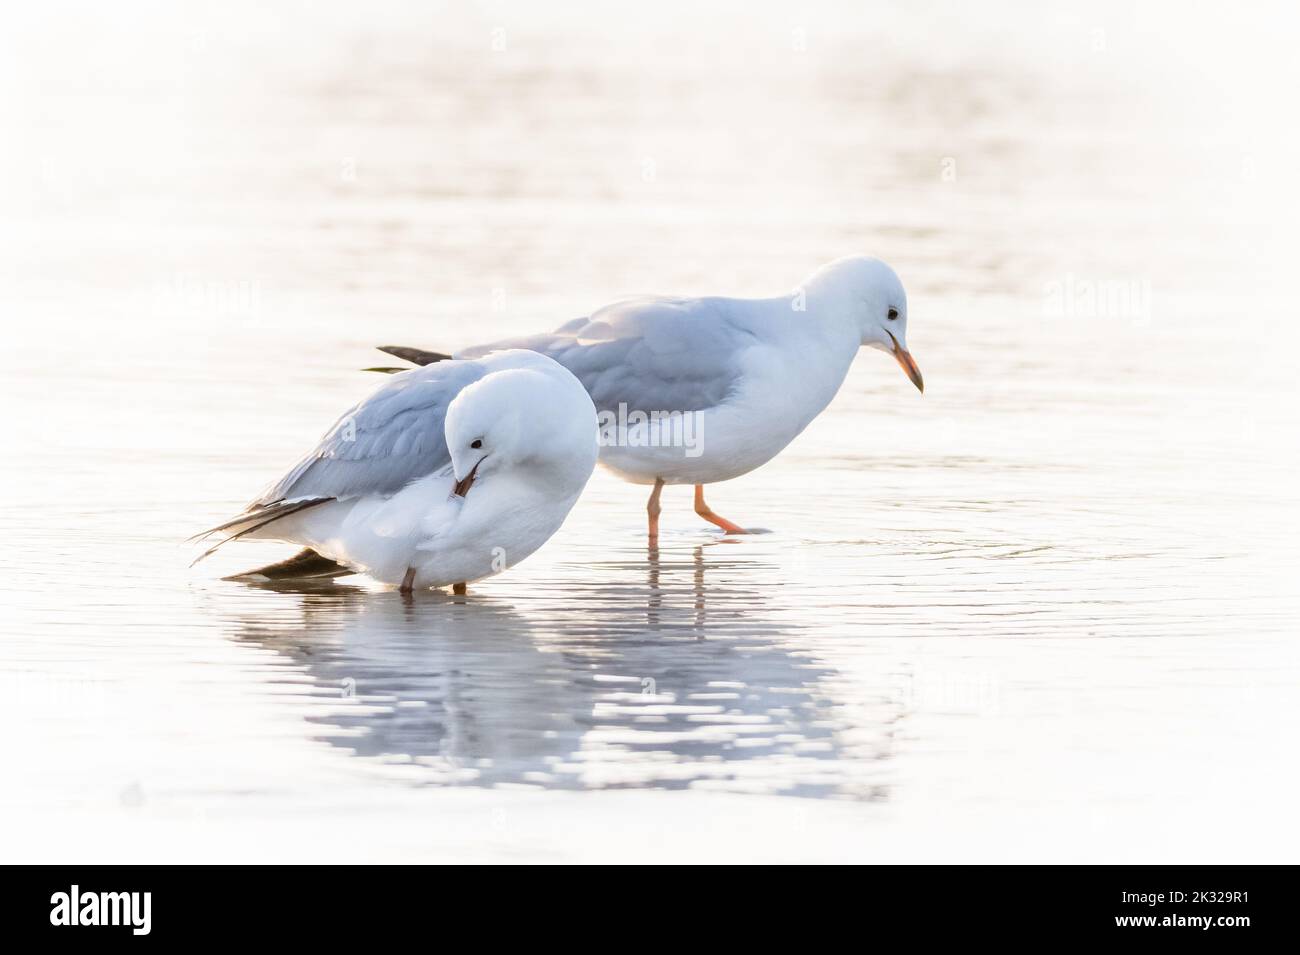 Two Seagulls on the ocean shoreline - High key image with white background Stock Photo